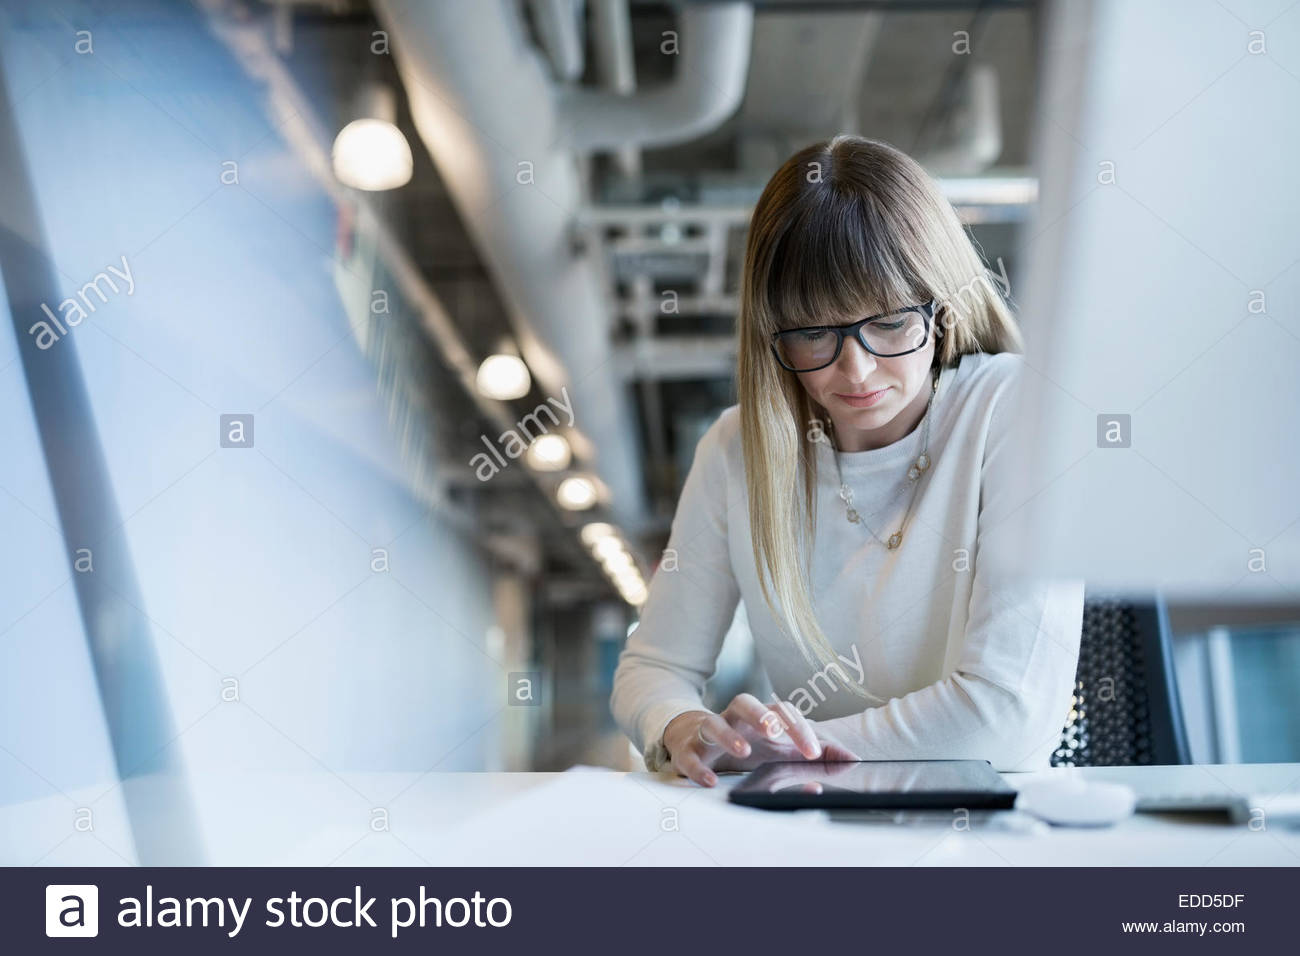 Businesswoman using digital tablet at office desk Stock Photo